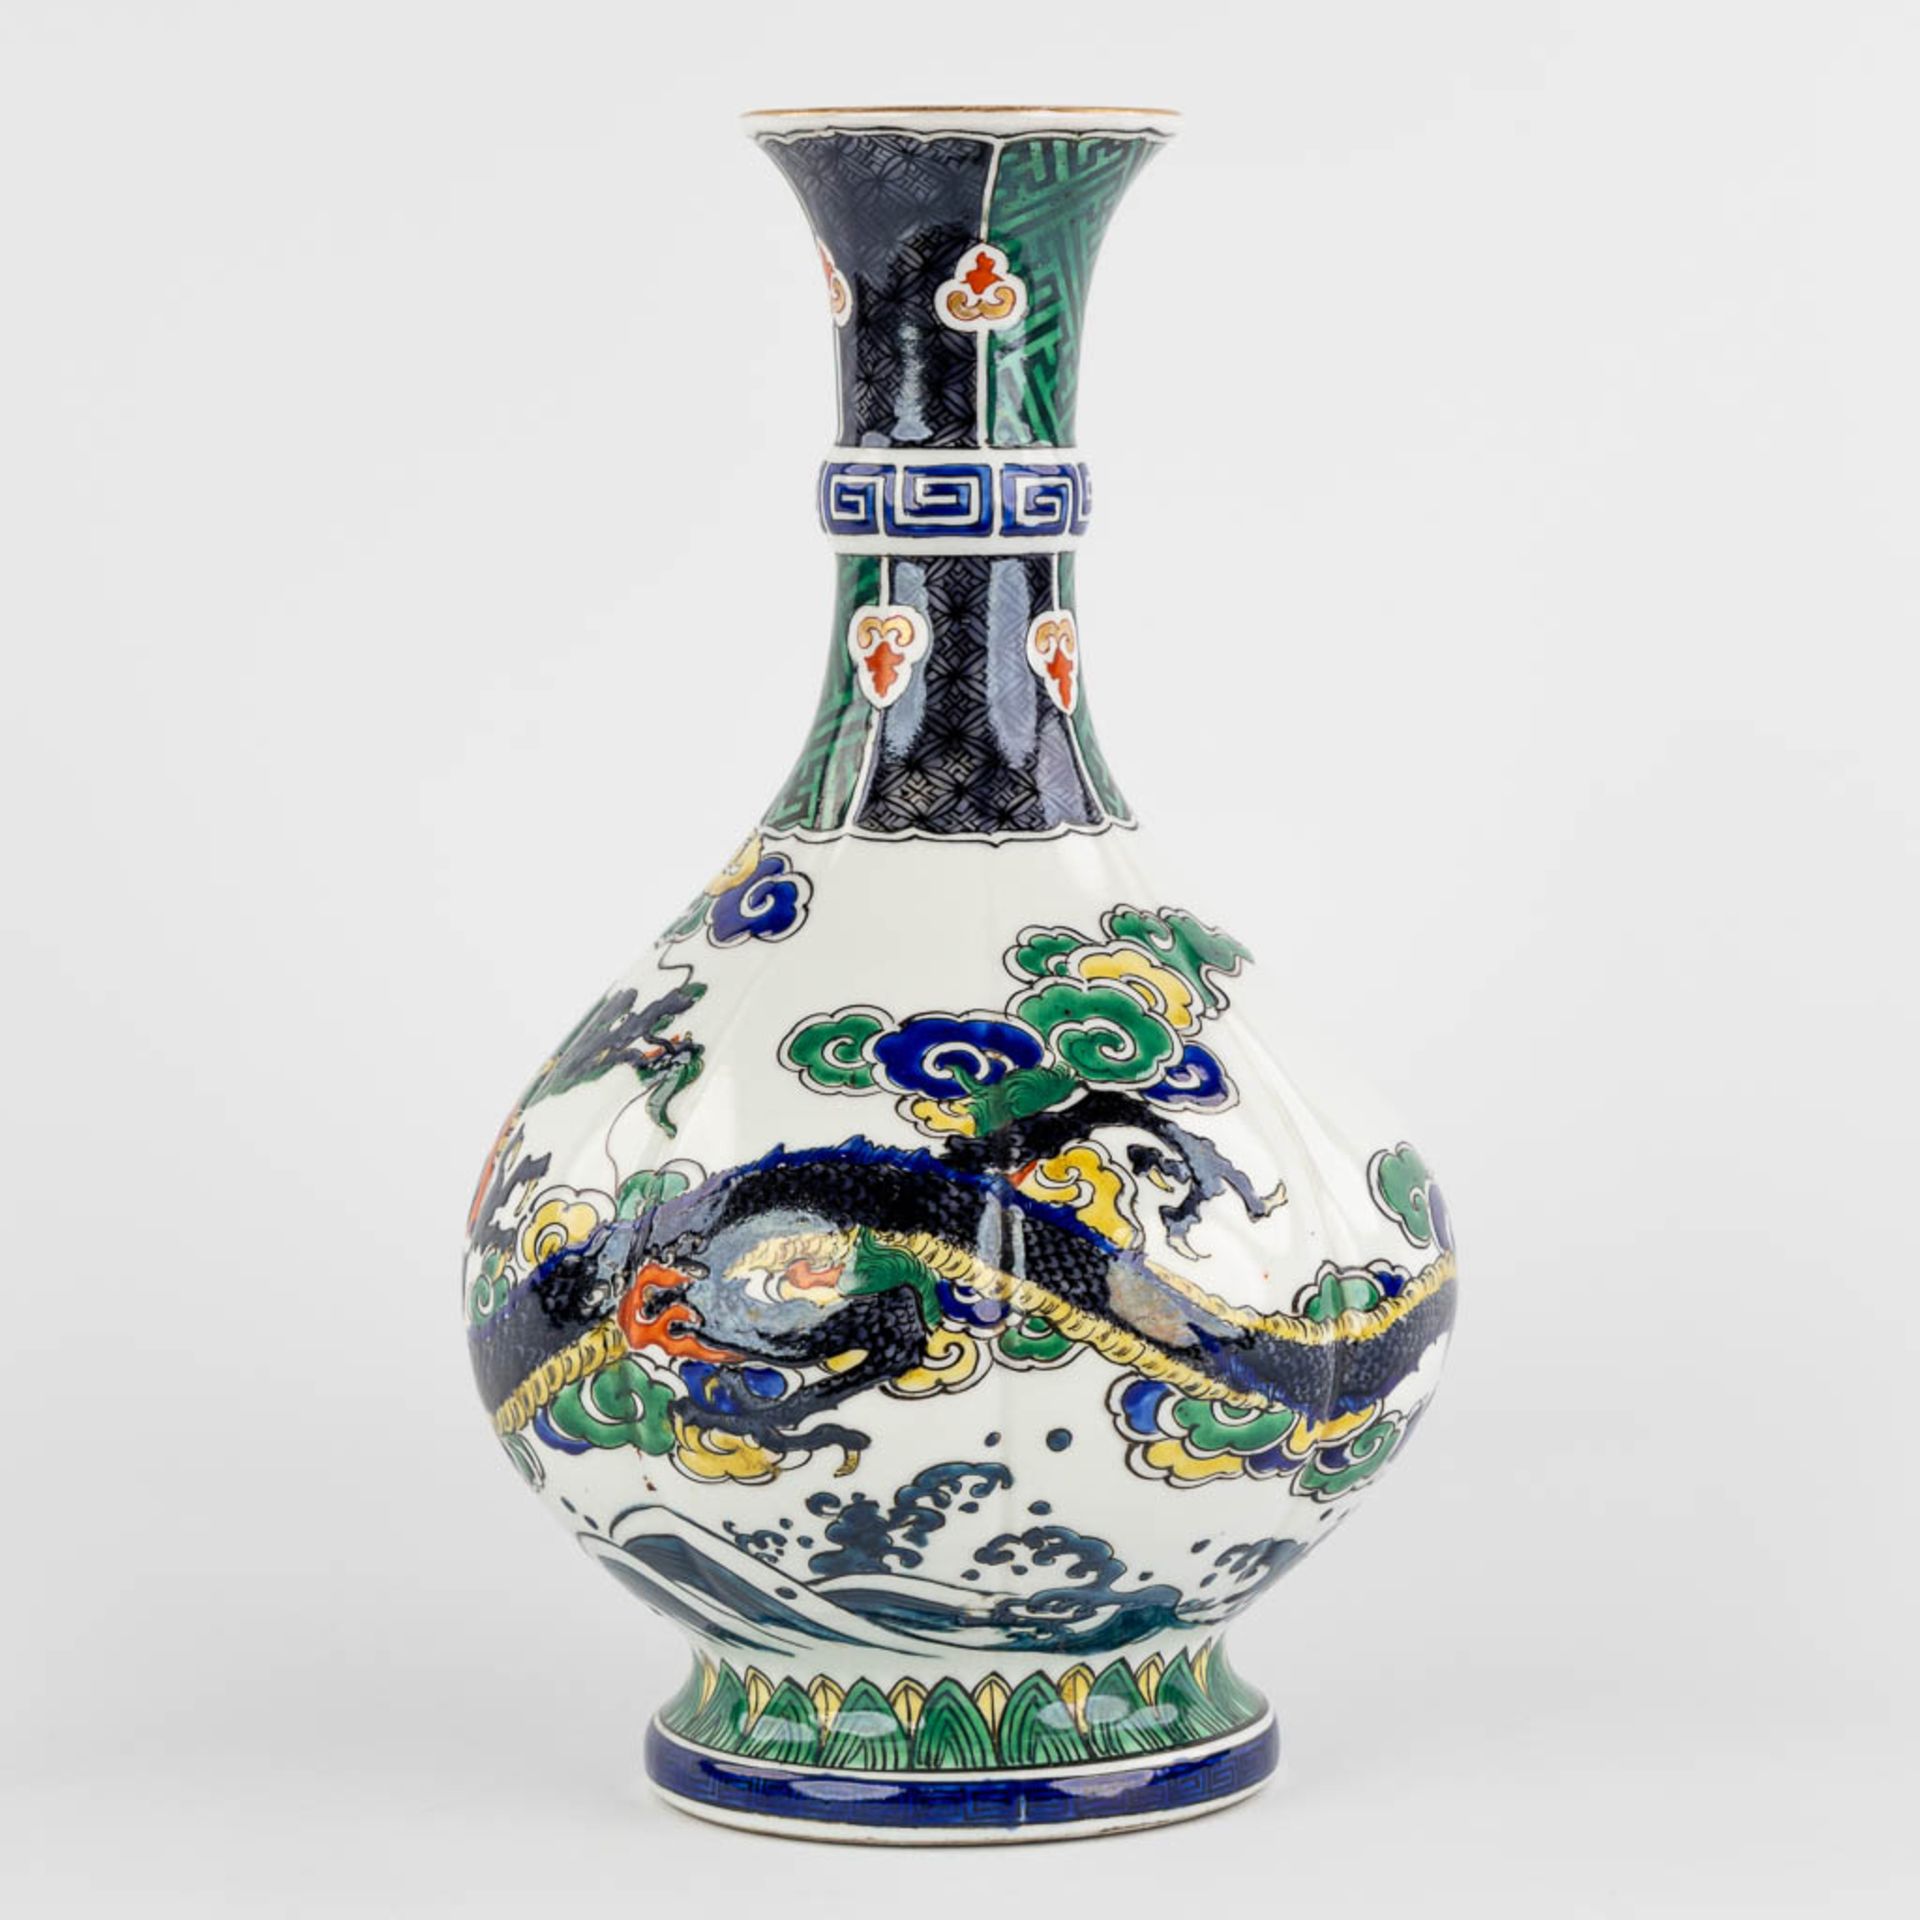 An antique Japanese vase with a three clawed dragon decor, 19th C. (H:30 x D:18 cm) - Image 5 of 10